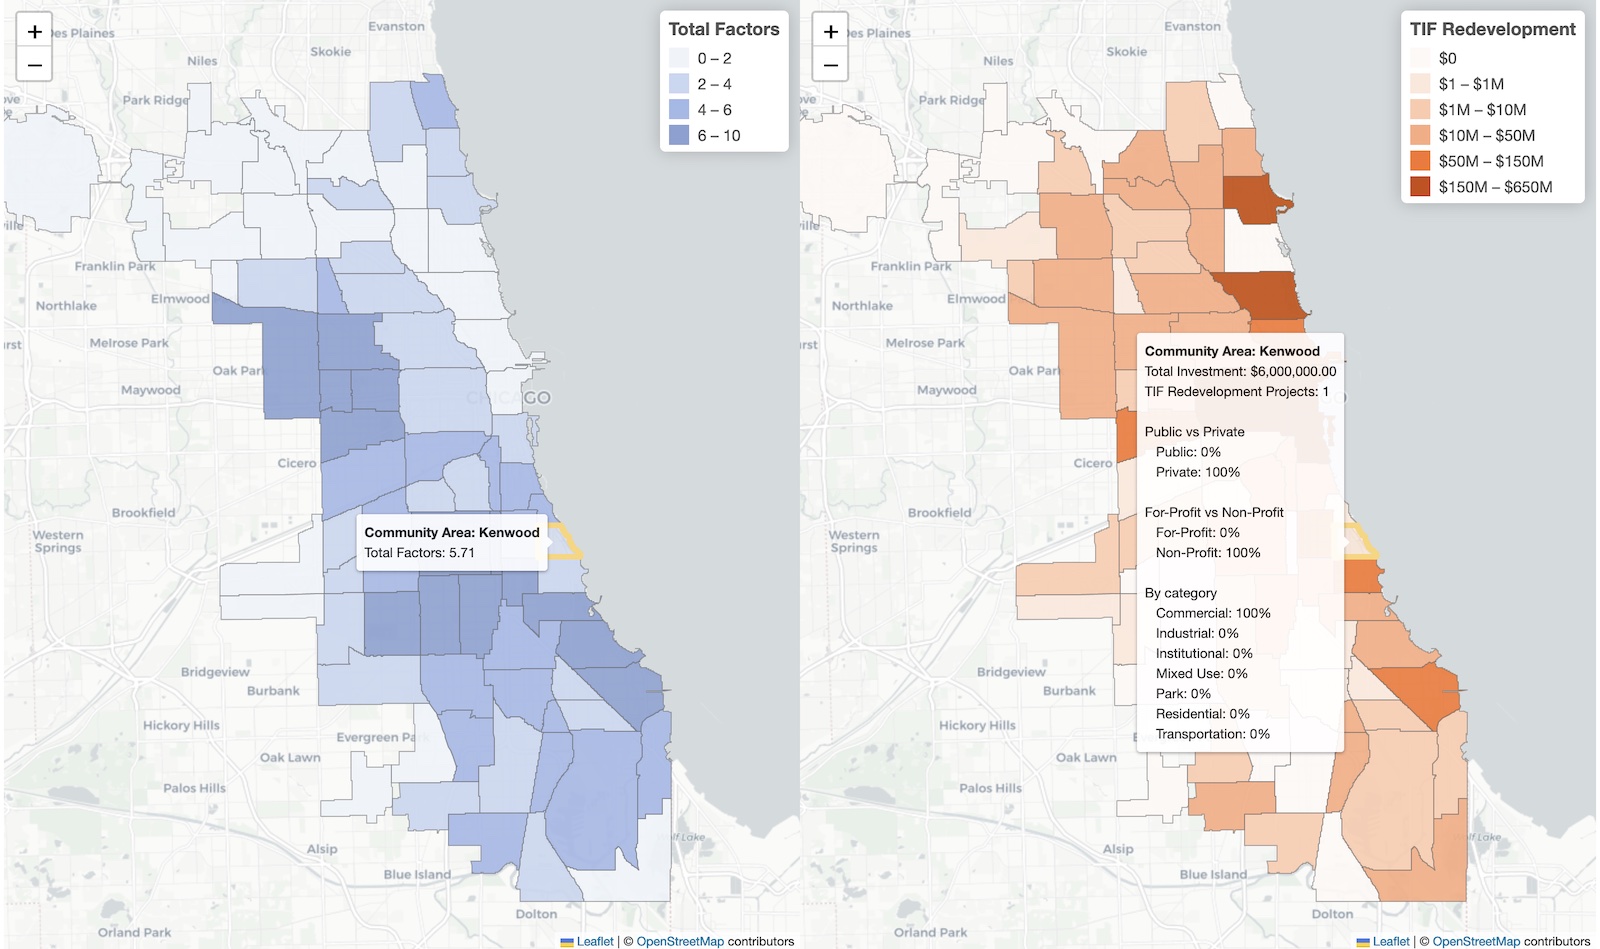 View data by Community Area and Ward